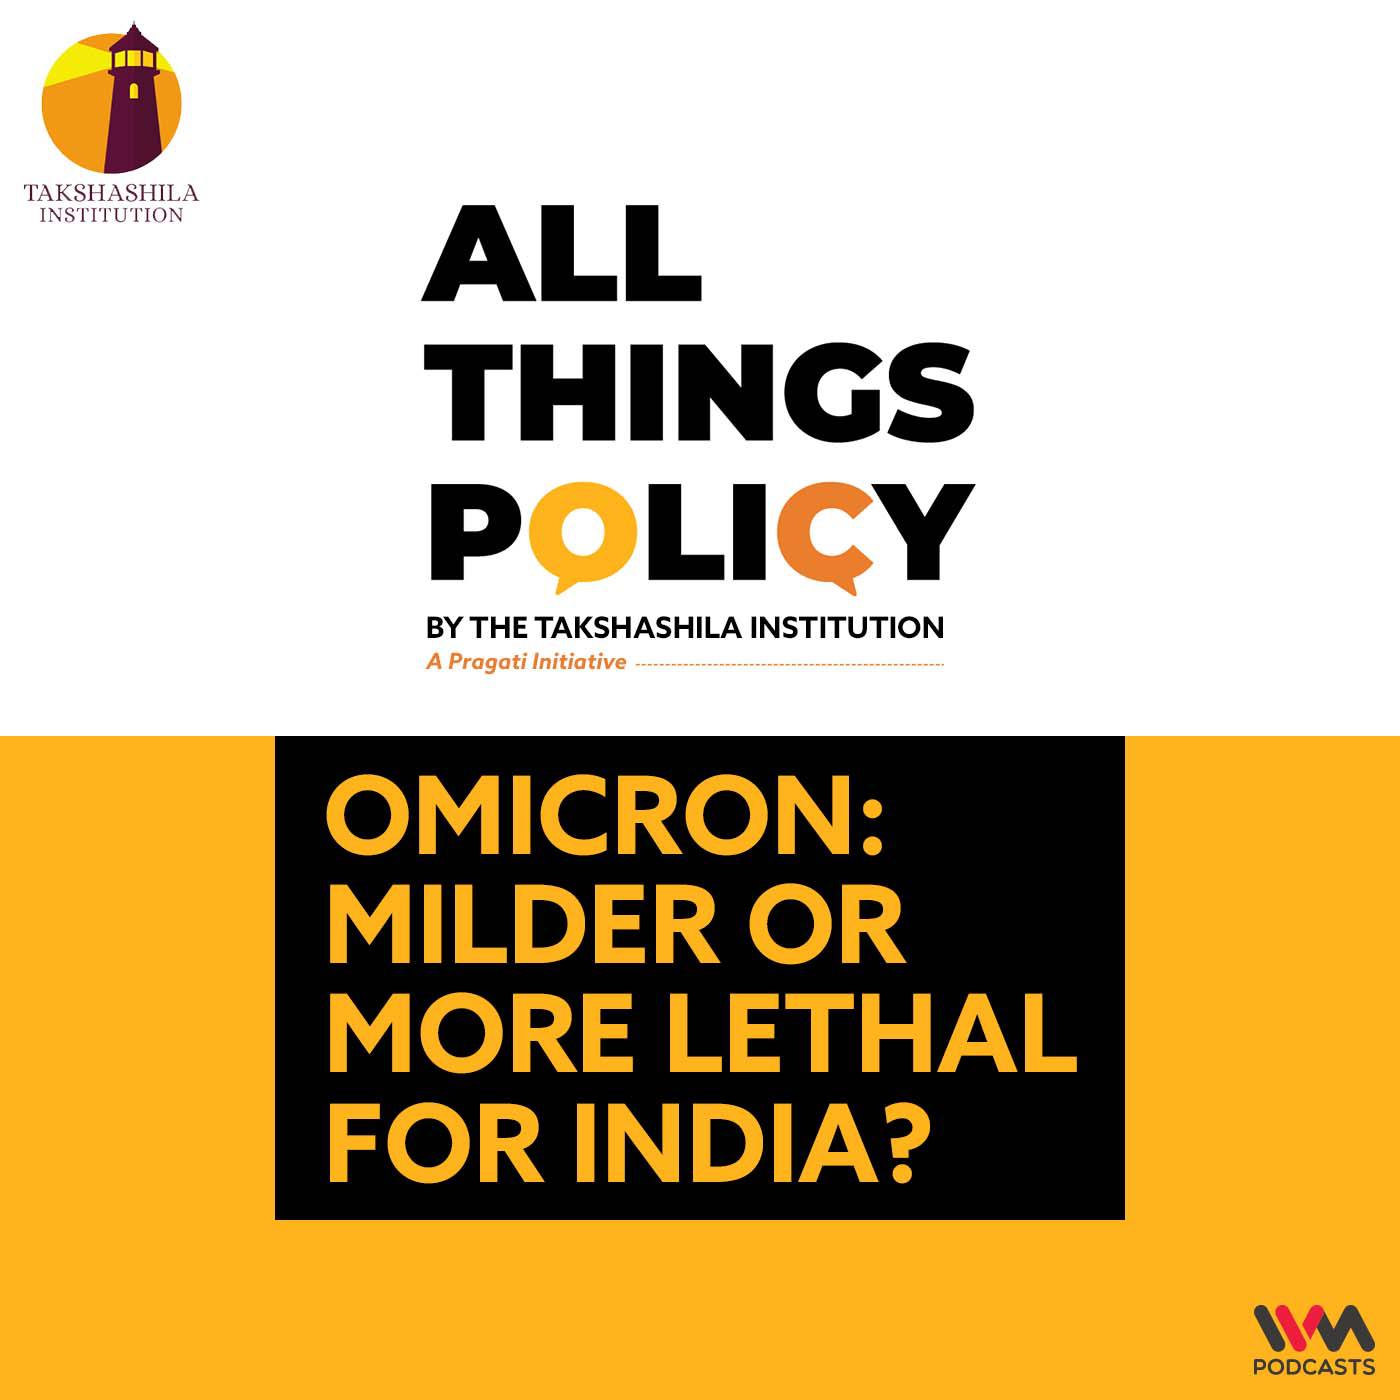 Omicron: Milder or More Lethal for India?